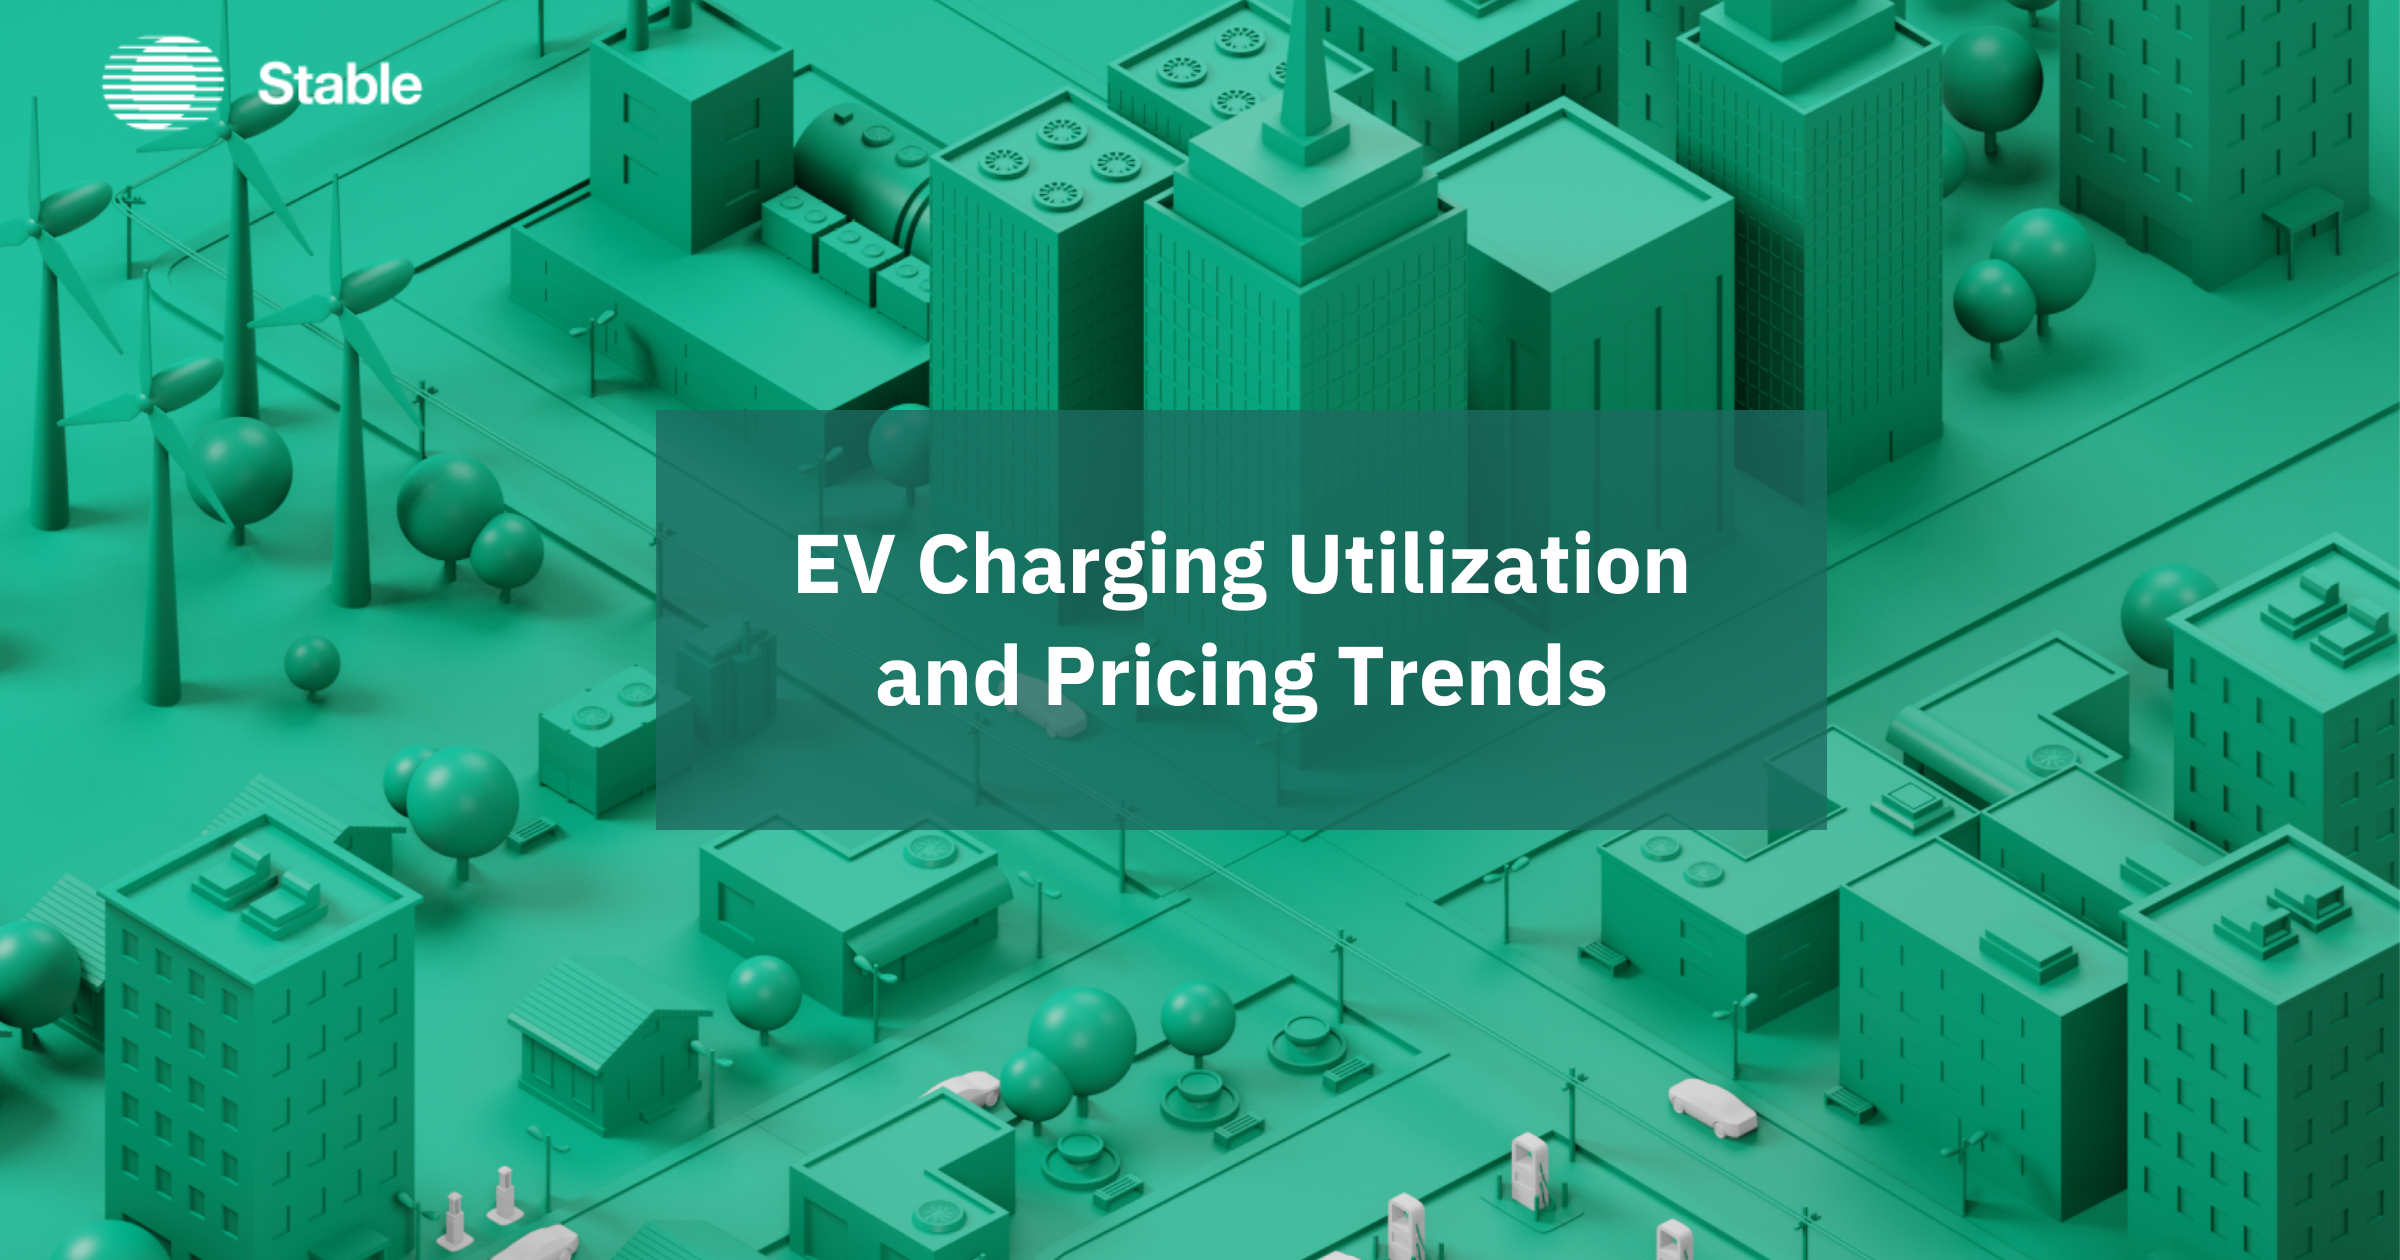 New Data Reveals How EV Charger Usage and Pricing Impacts Profits